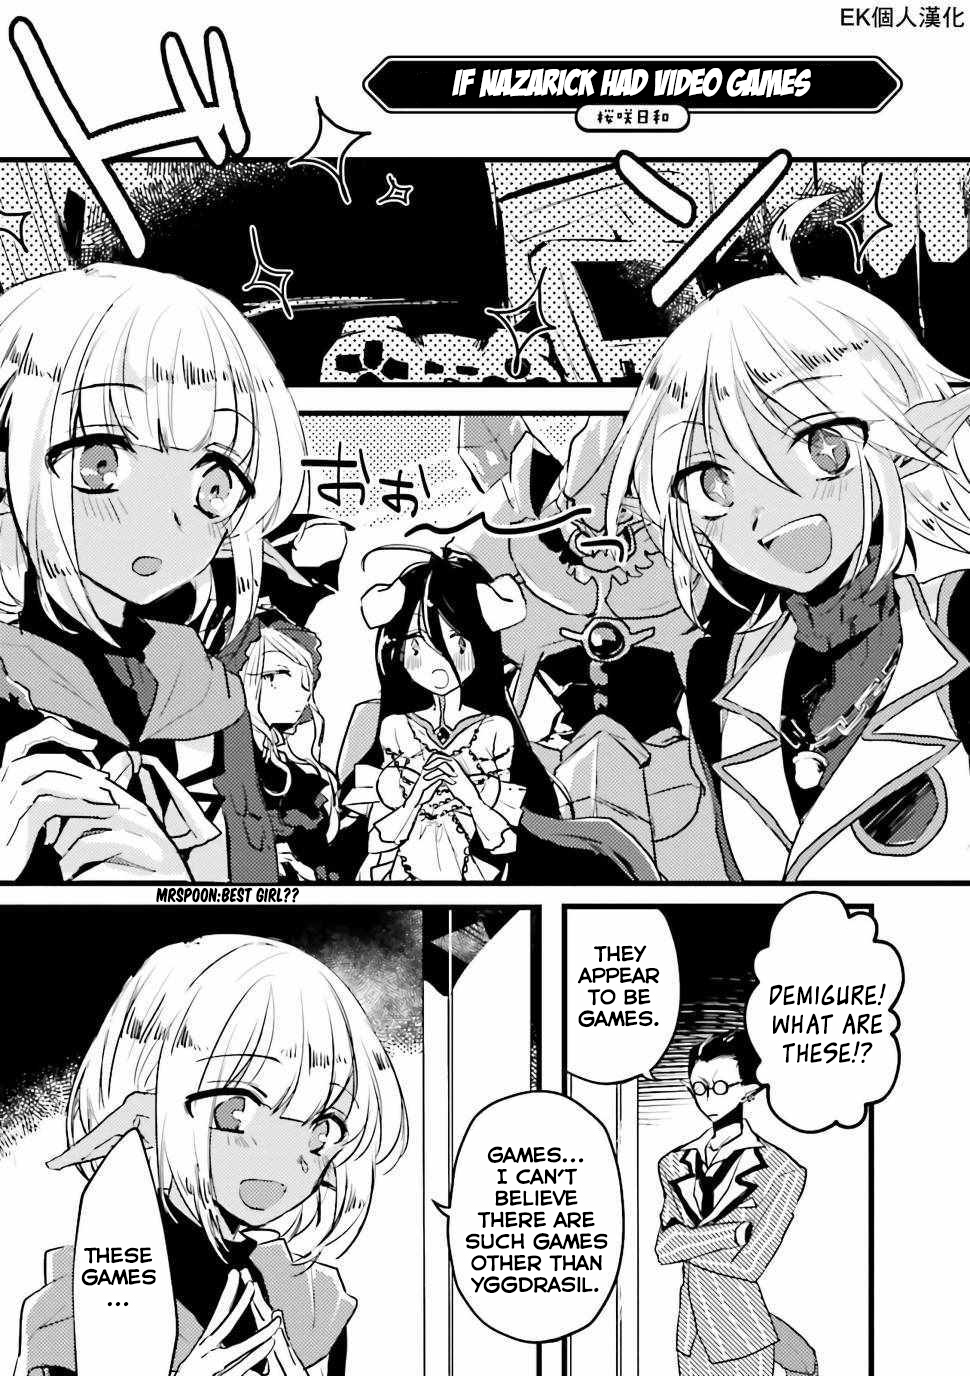 Overlord Official Comic A La Carte Vol. 2 Ch. 24 If nazarick had video games